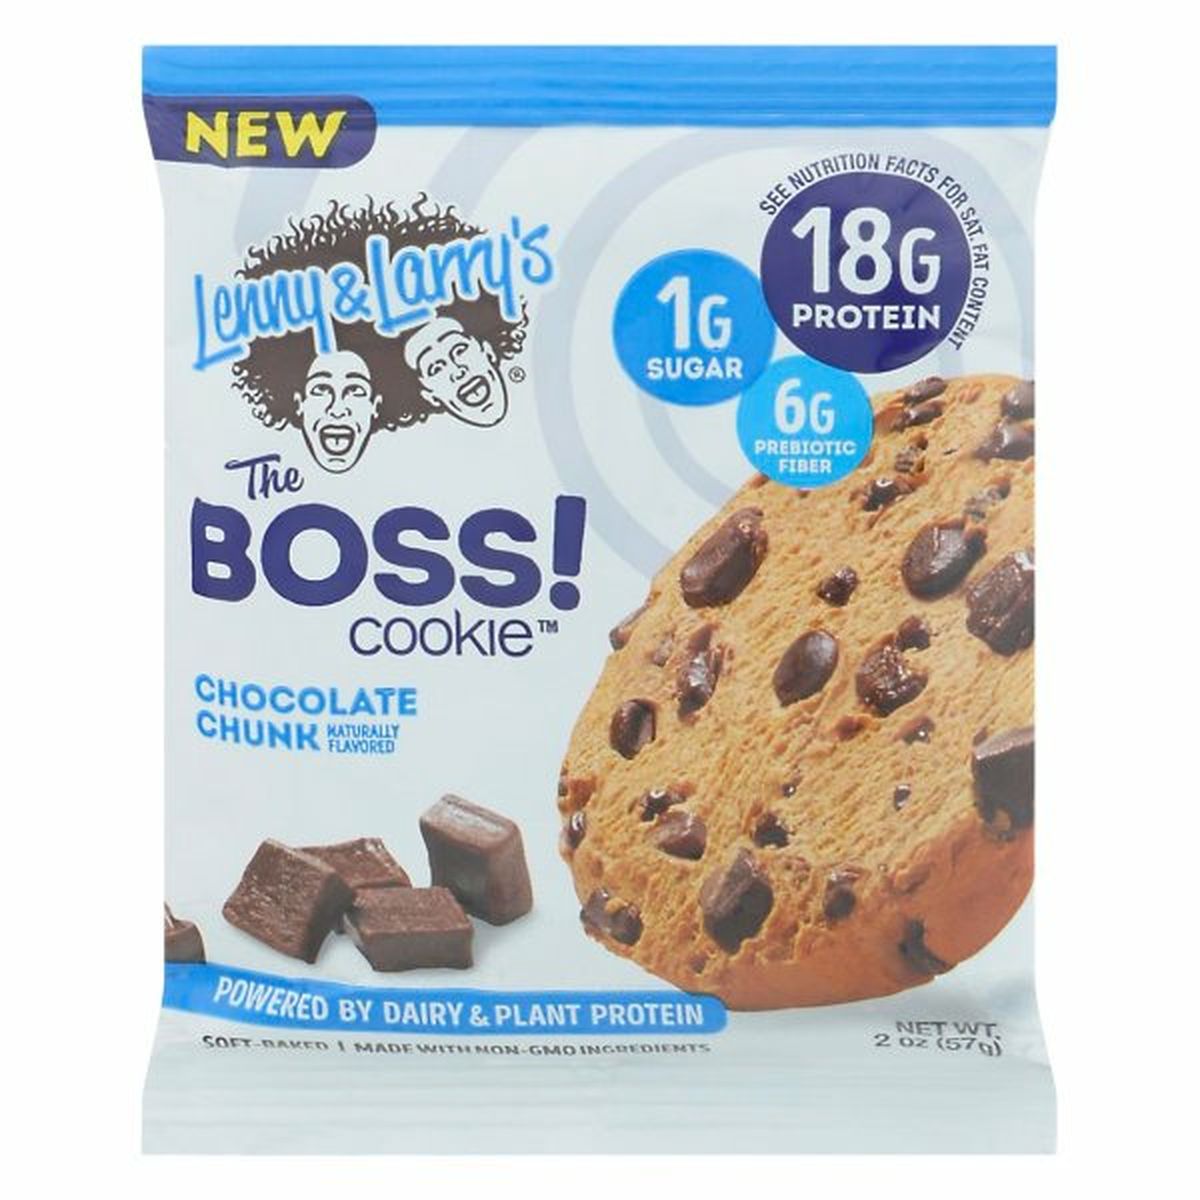 Calories in Lenny & Larry's The Boss Cookie, Chocolate Chunk